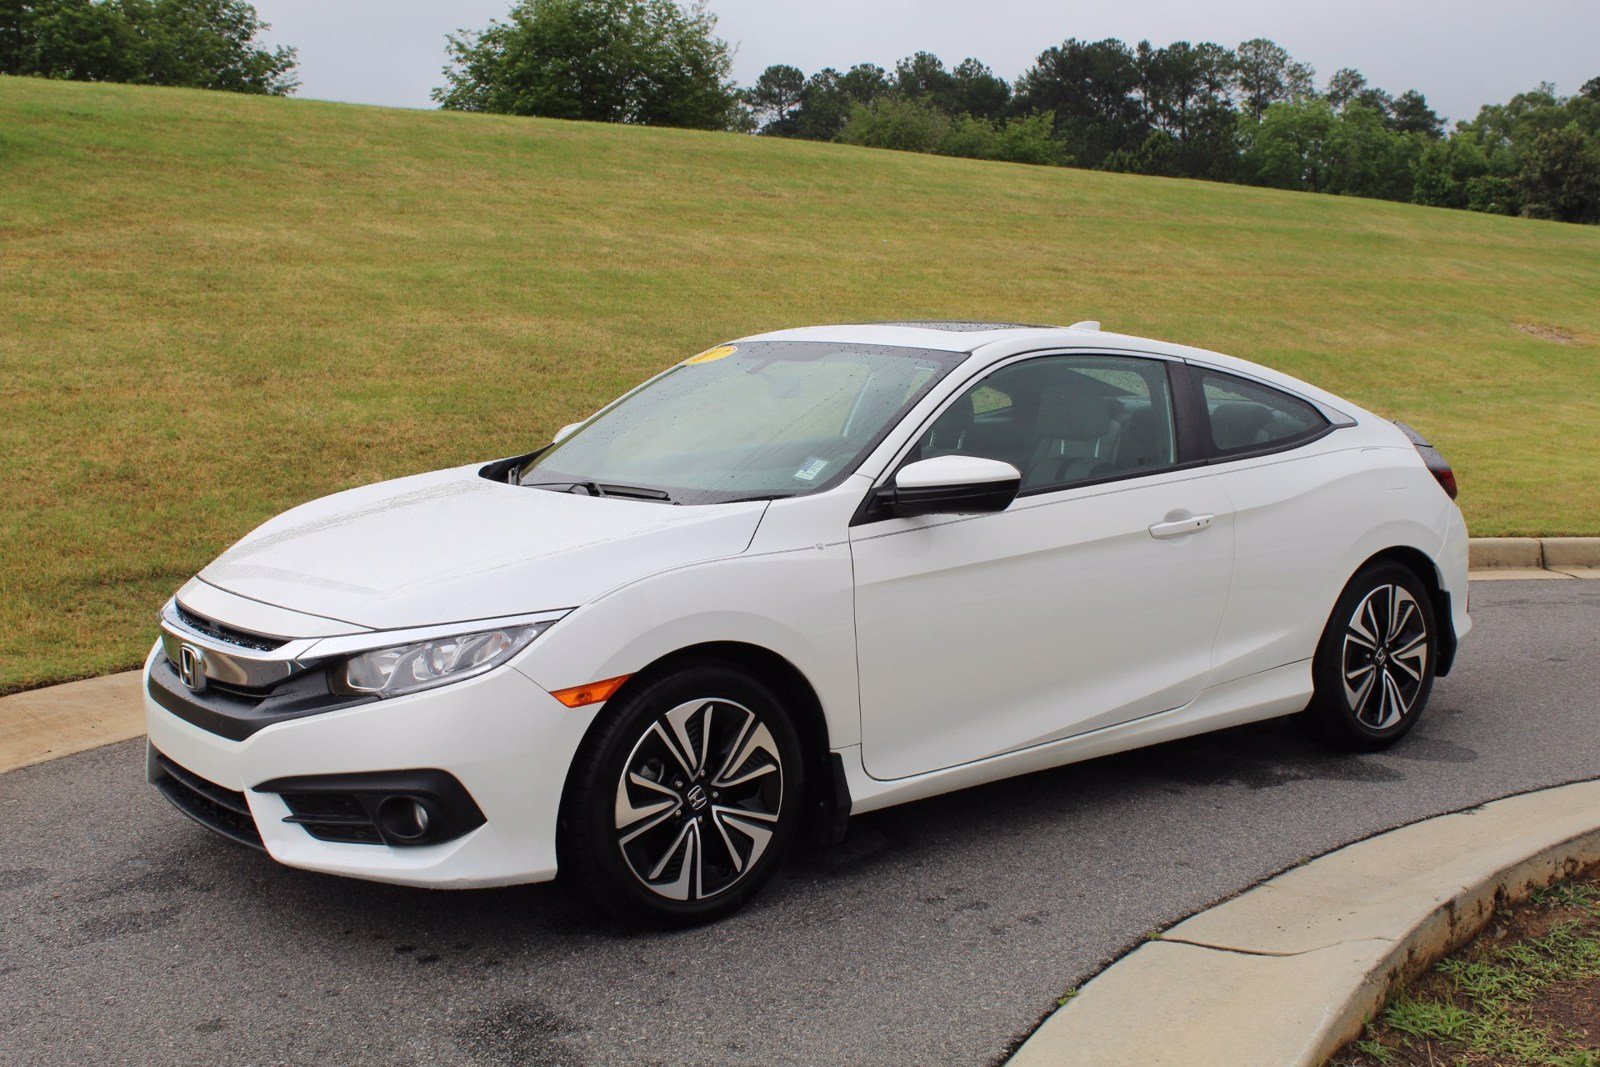 PreOwned 2017 Honda Civic Coupe EXT 2dr Car in Macon 